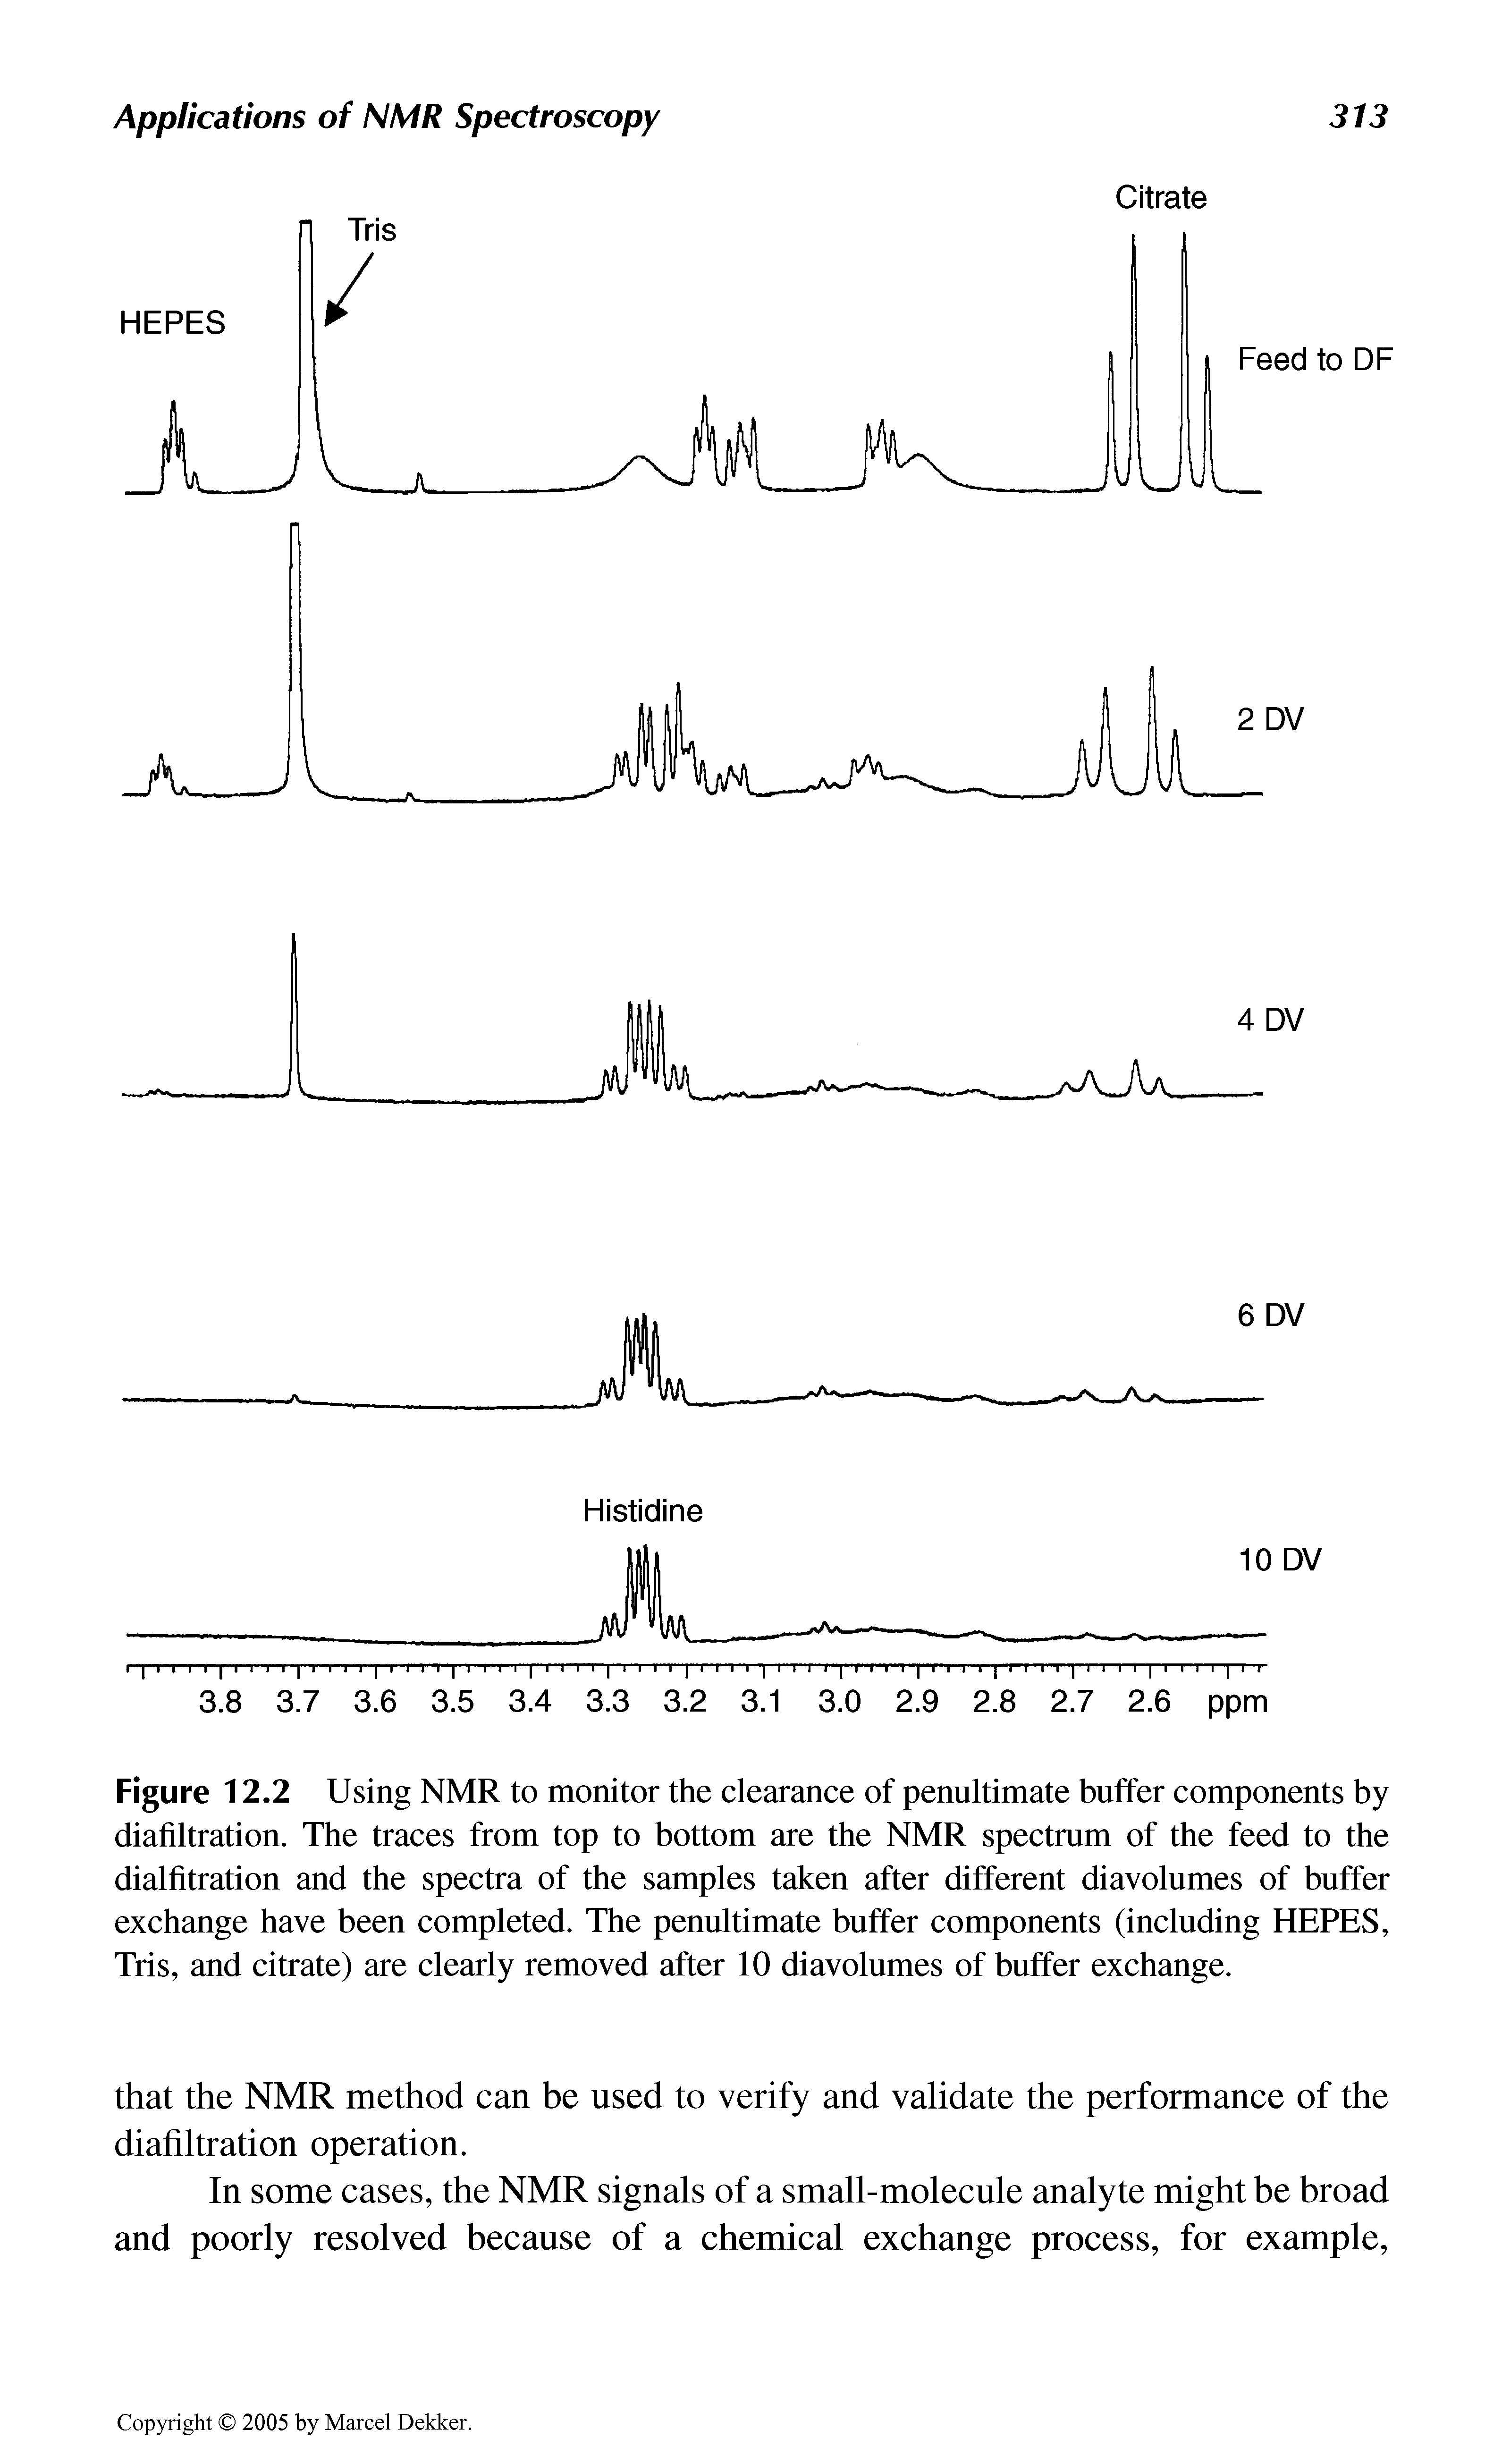 Figure 12.2 Using NMR to monitor the clearance of penultimate buffer components by diafiltration. The traces from top to bottom are the NMR spectrum of the feed to the dialfitration and the spectra of the samples taken after different diavolumes of buffer exchange have been completed. The penultimate buffer components (including HEPES, Tris, and citrate) are clearly removed after 10 diavolumes of buffer exchange.